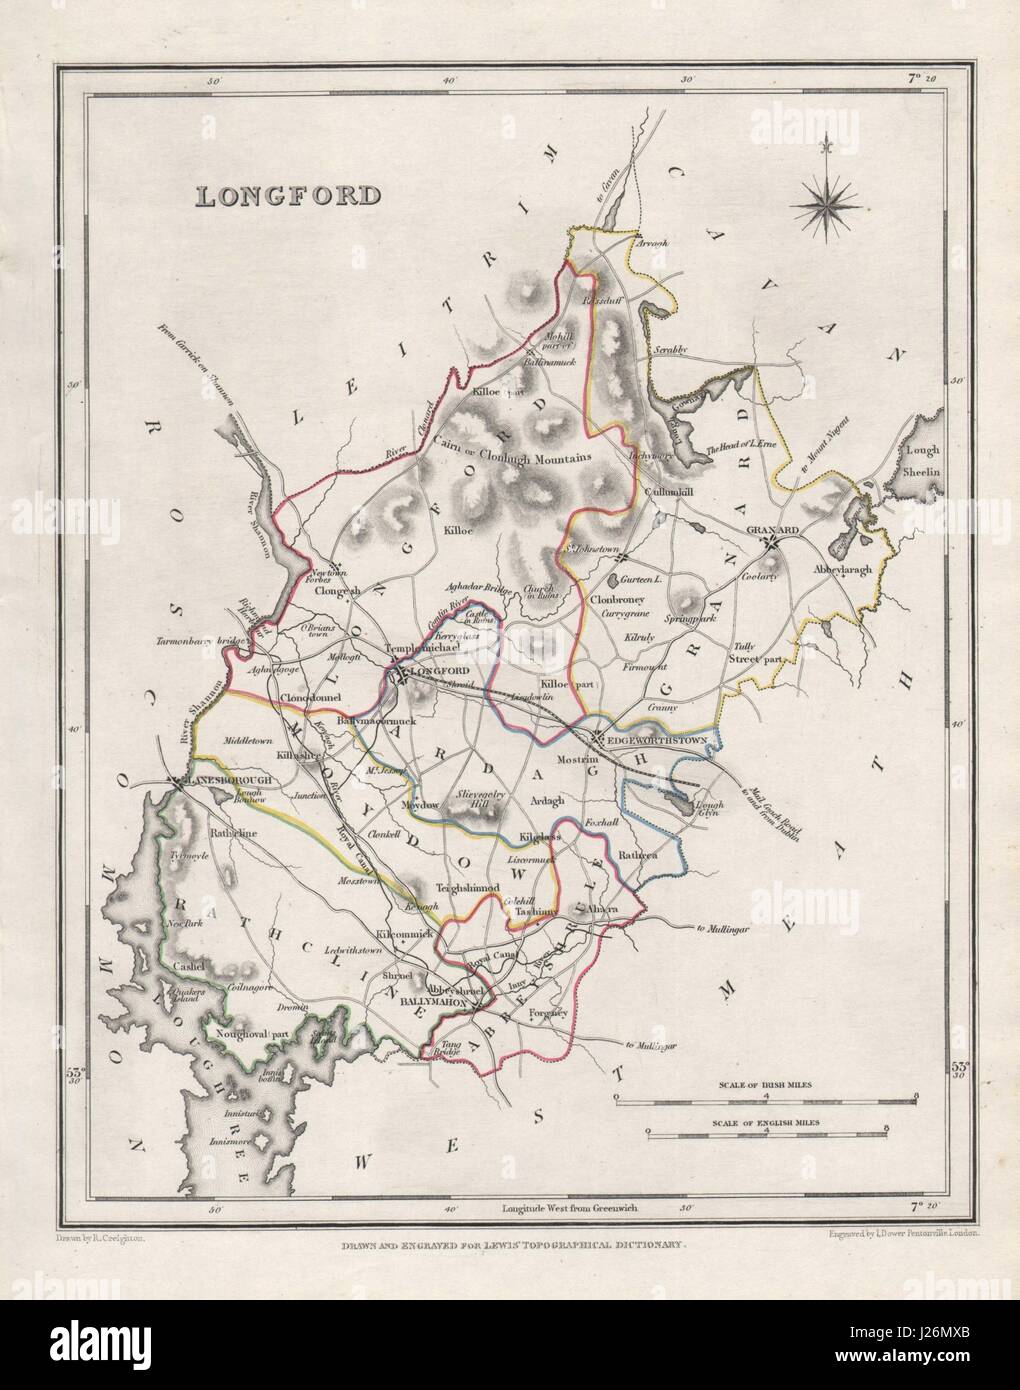 COUNTY LONGFORD antique map for LEWIS by CREIGHTON & DOWER. Ireland 1846 Stock Photo